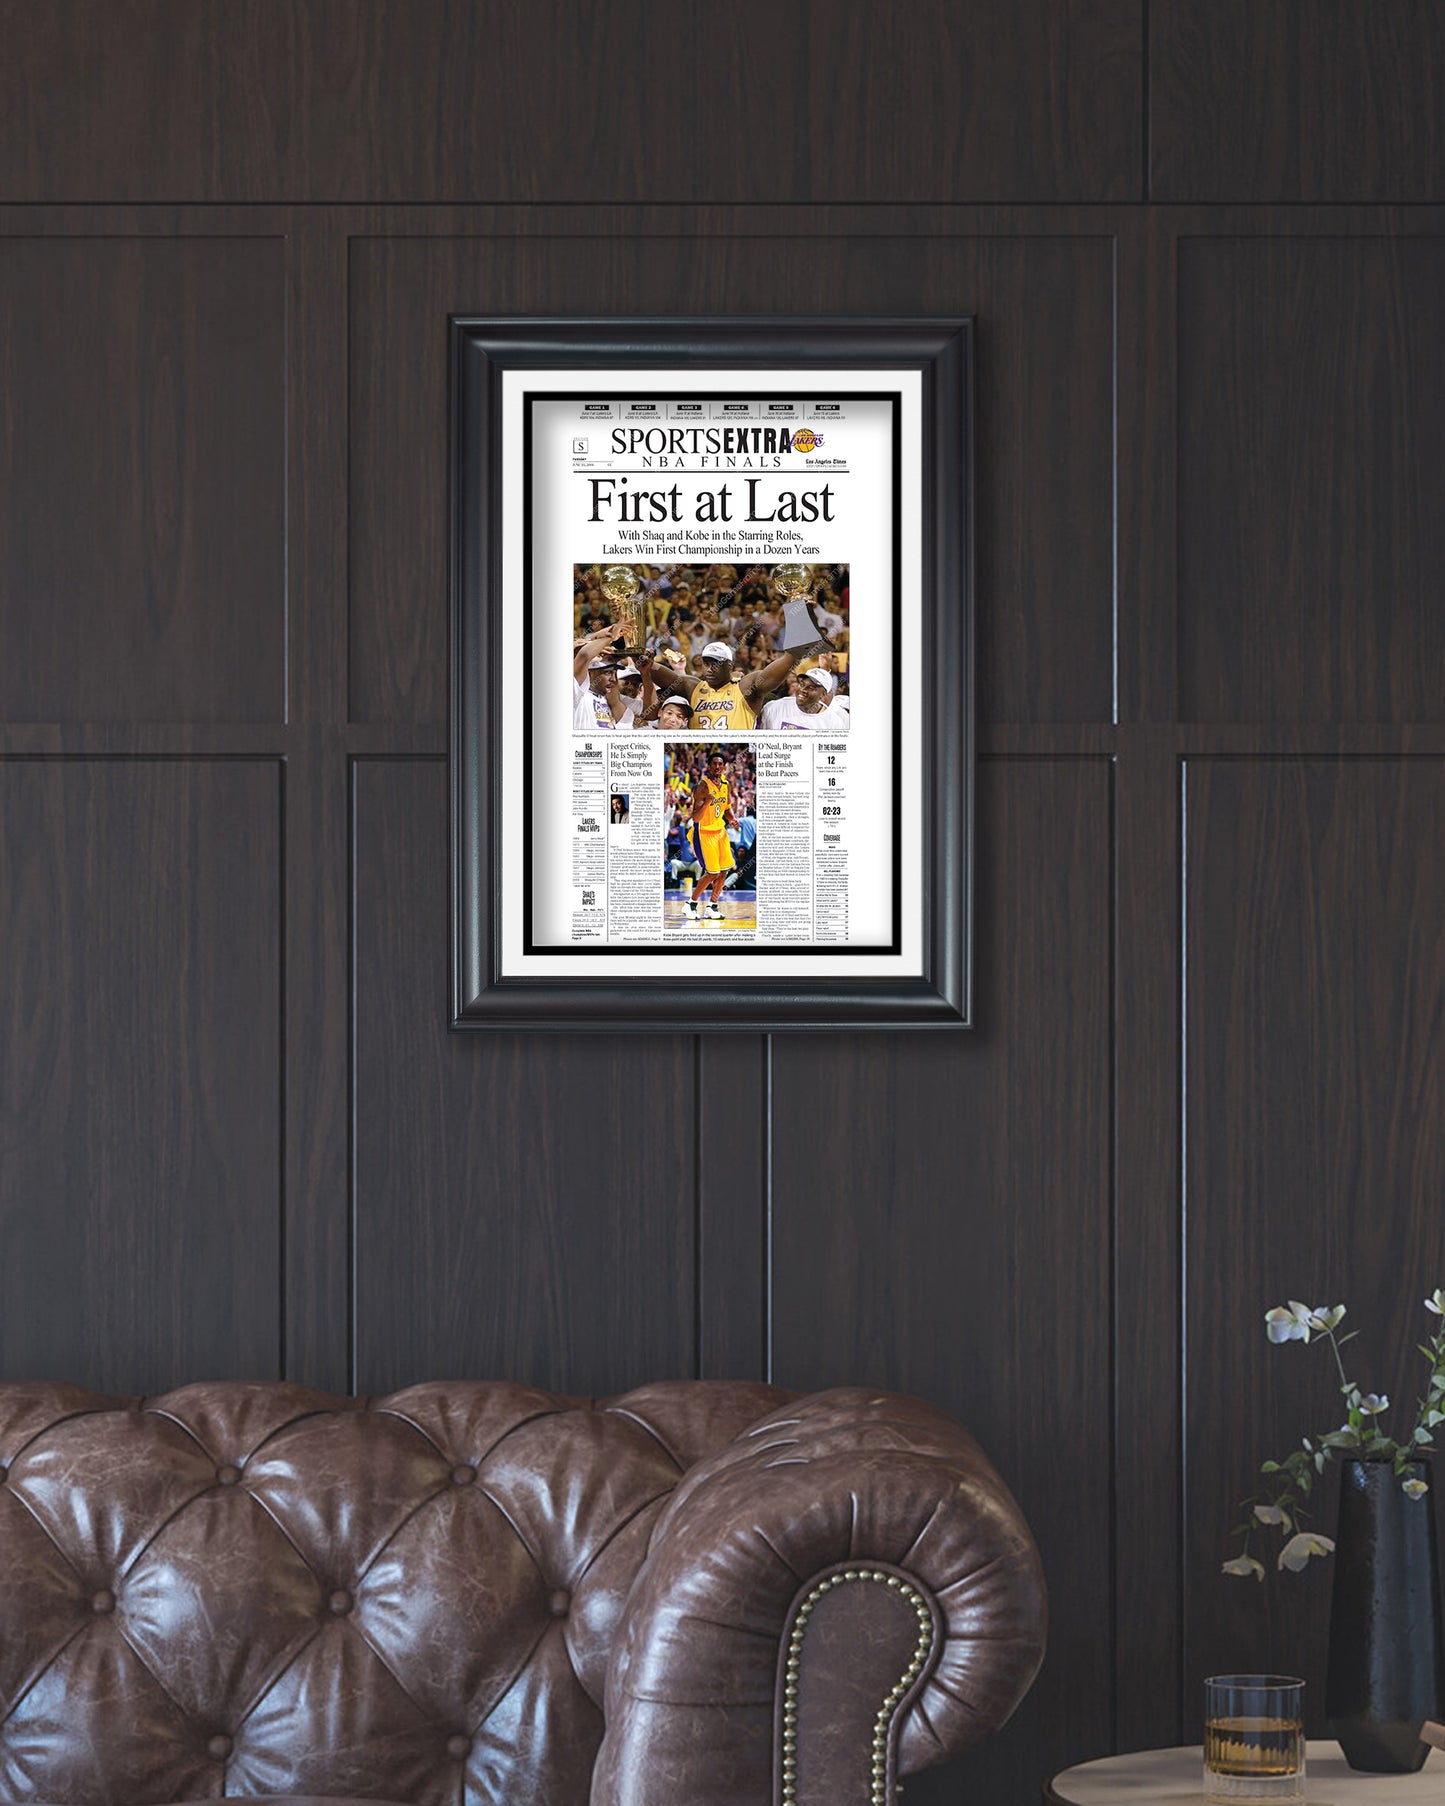 2000 Los Angeles Lakers NBA Champions Framed Newspaper Front Page Newspaper Print Kobe and Shaq Staples Center